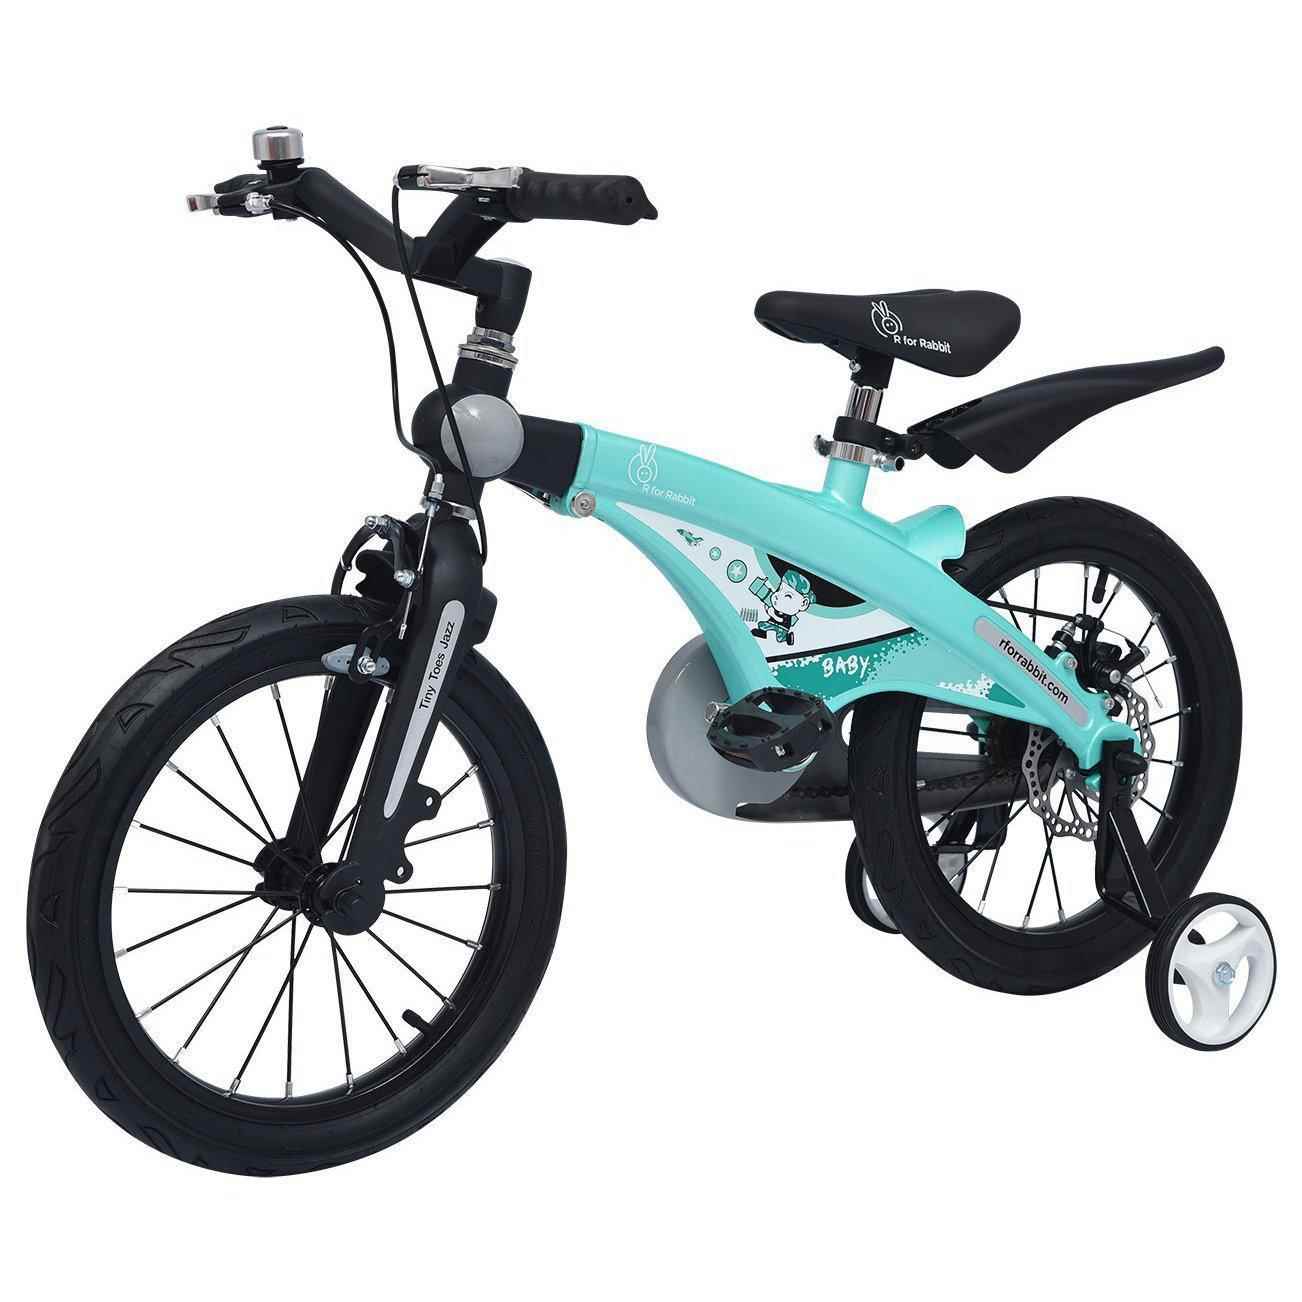 Buy premium quality Childrens Bicycles Online in India